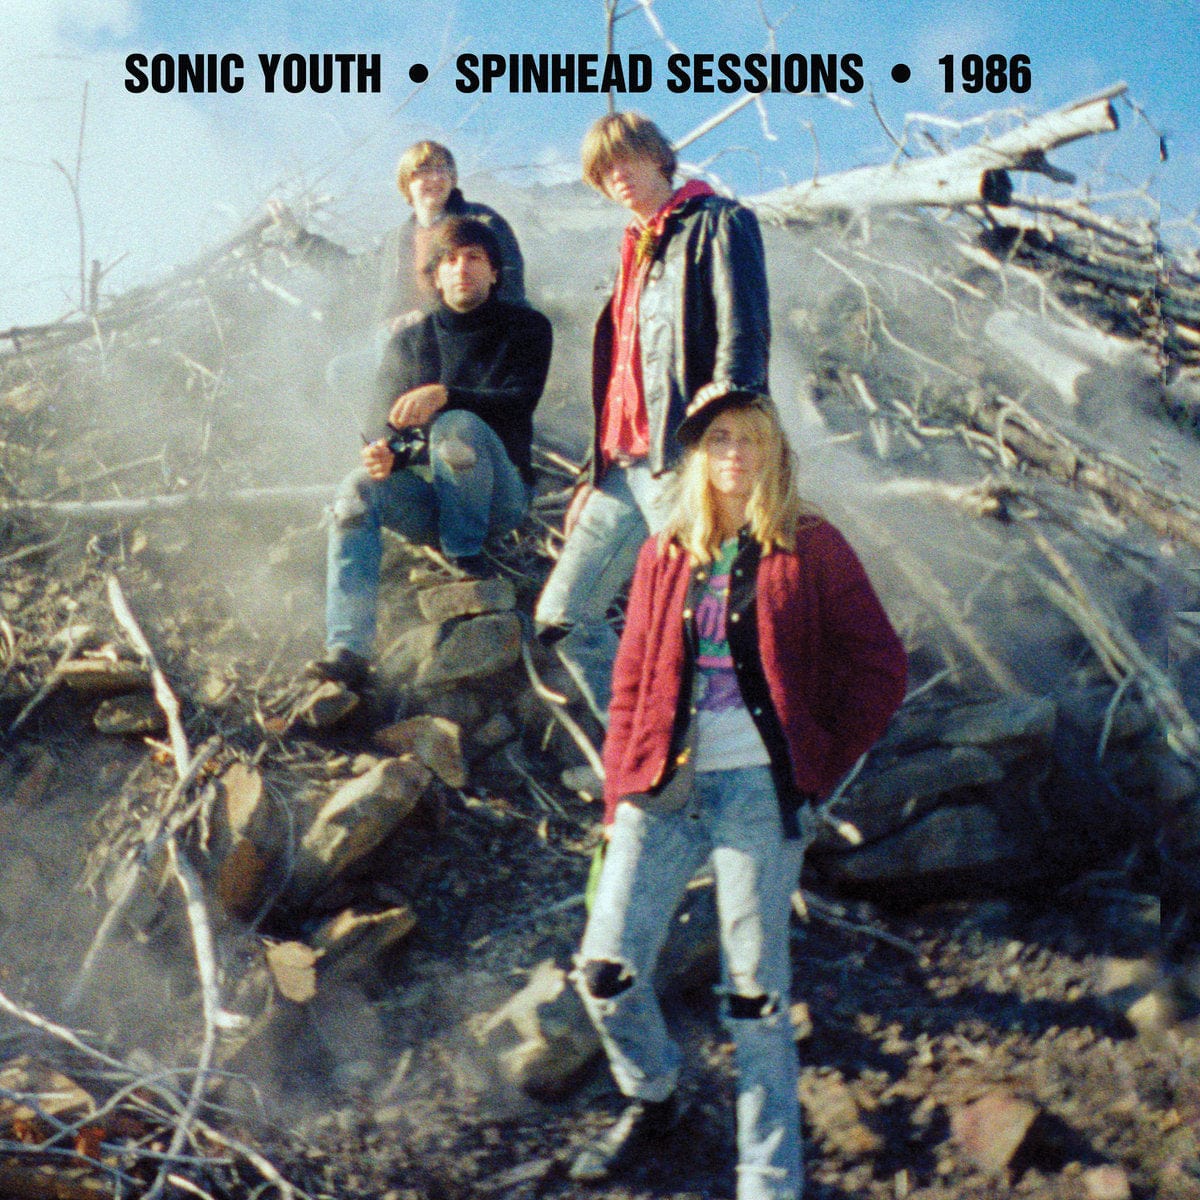 Goofin' Records Vinyl Sonic Youth "Spinhead Sessions" LP